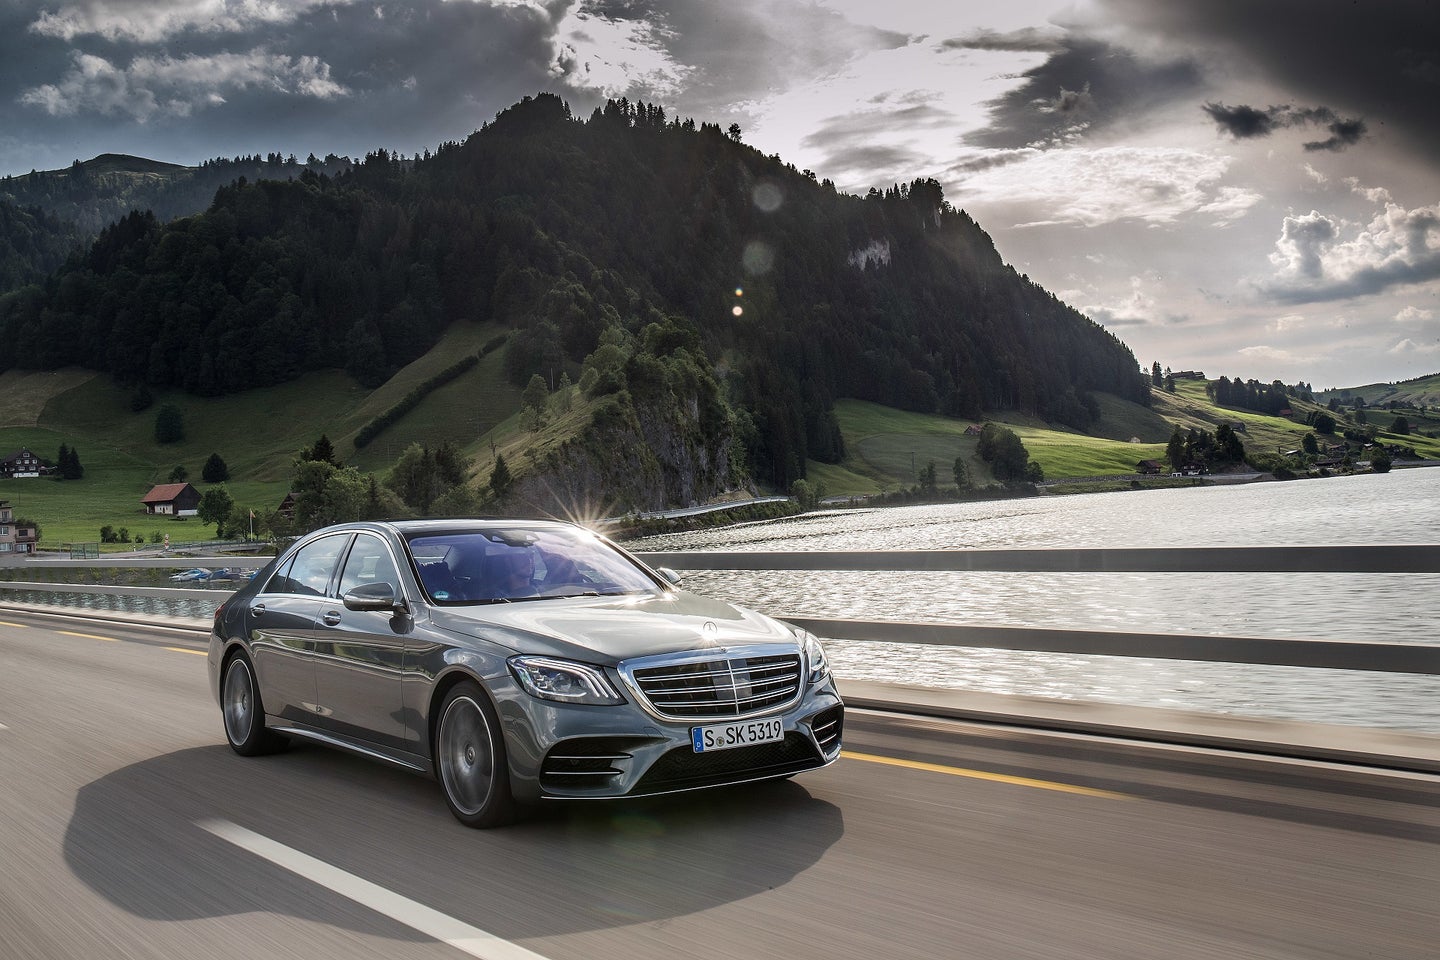 Mercedes Is the Best Selling Luxury Brand for the 2nd Year in a Row